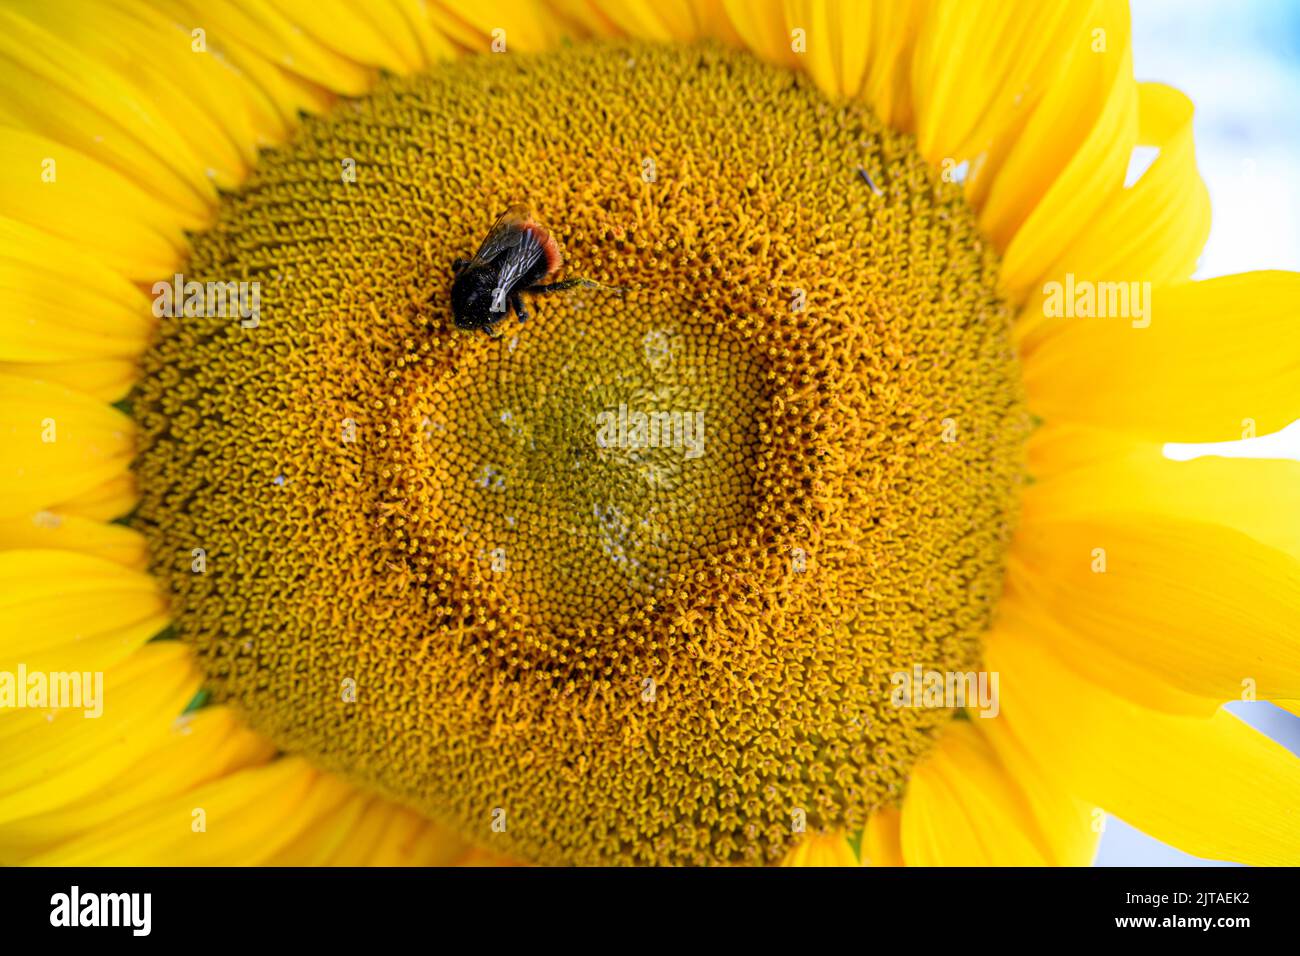 A bee in a wild garden with sunflowers, UK. Stock Photo